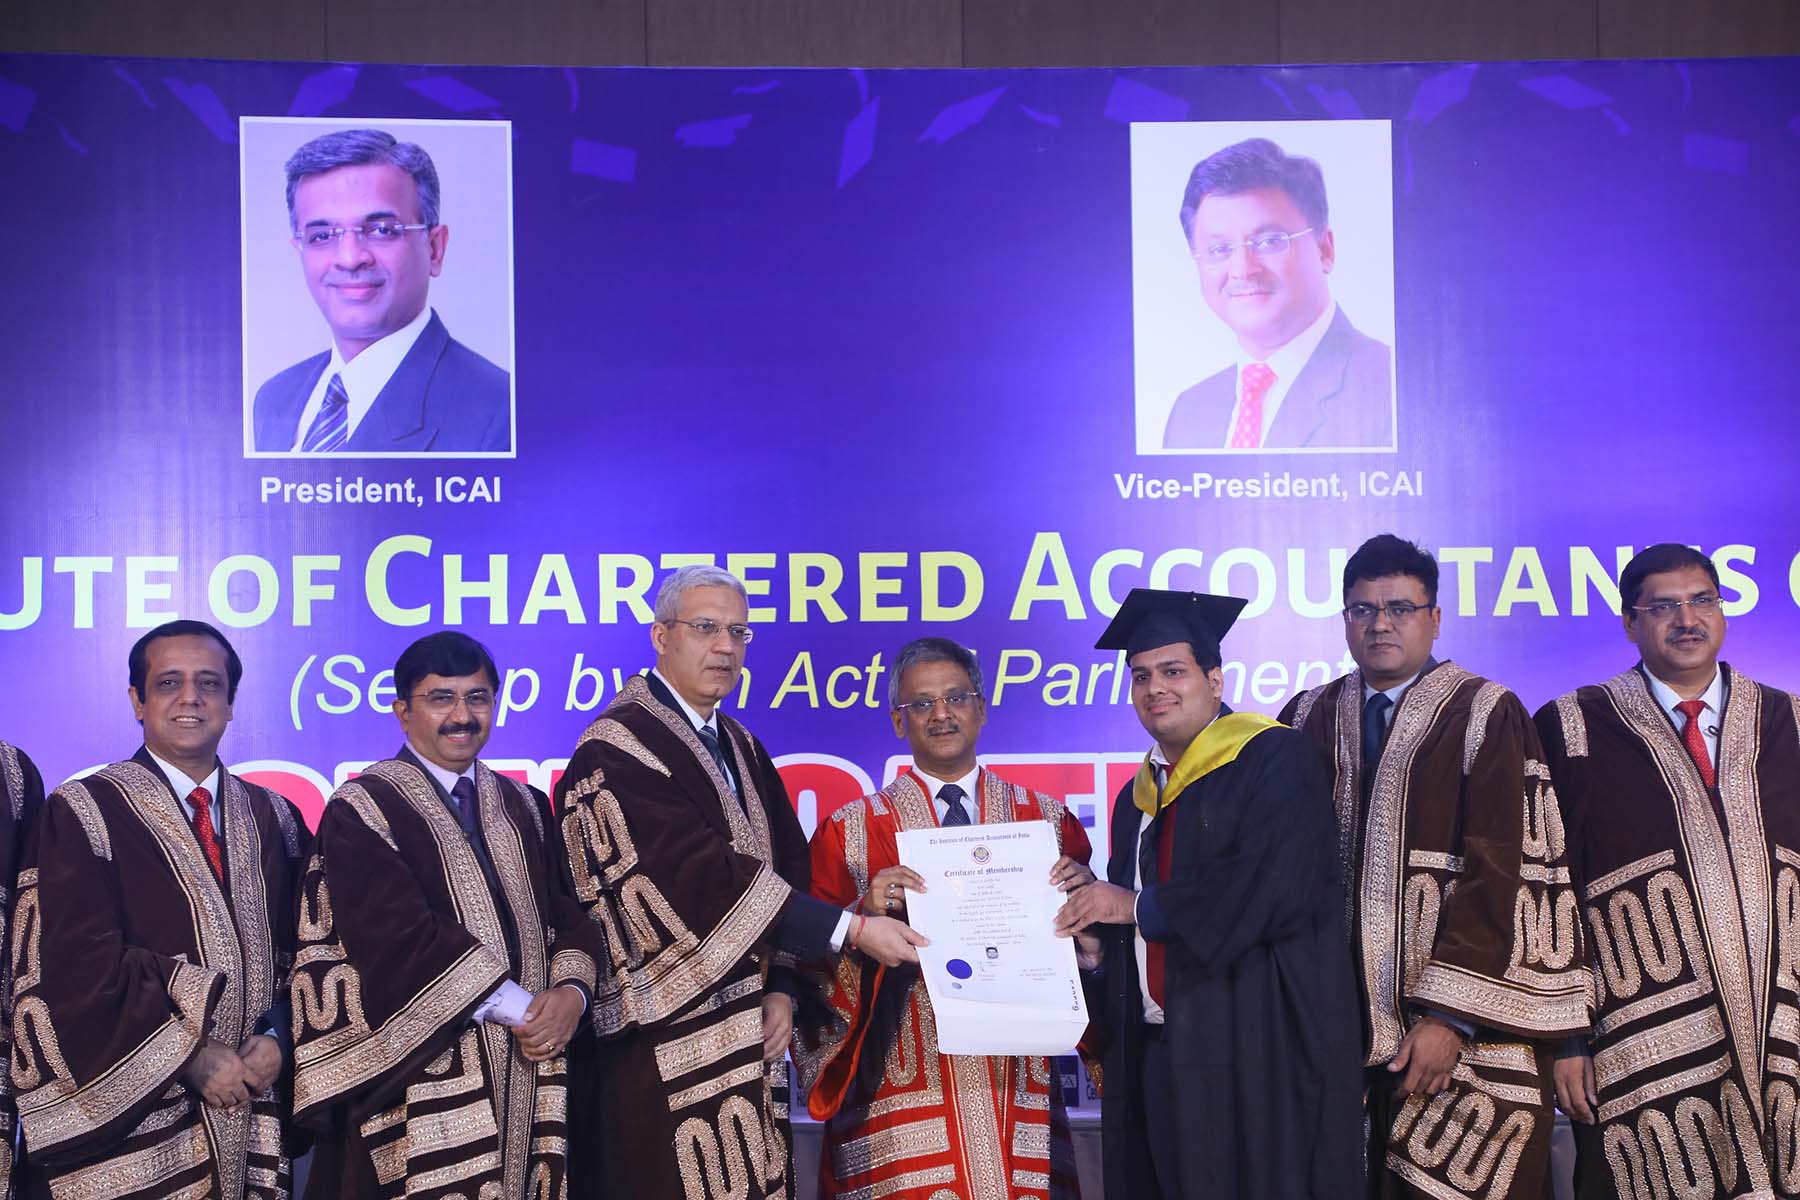 ICAI awards Rank Certificates to the meritorious Chartered Accountants through nationwide convocation ceremonies